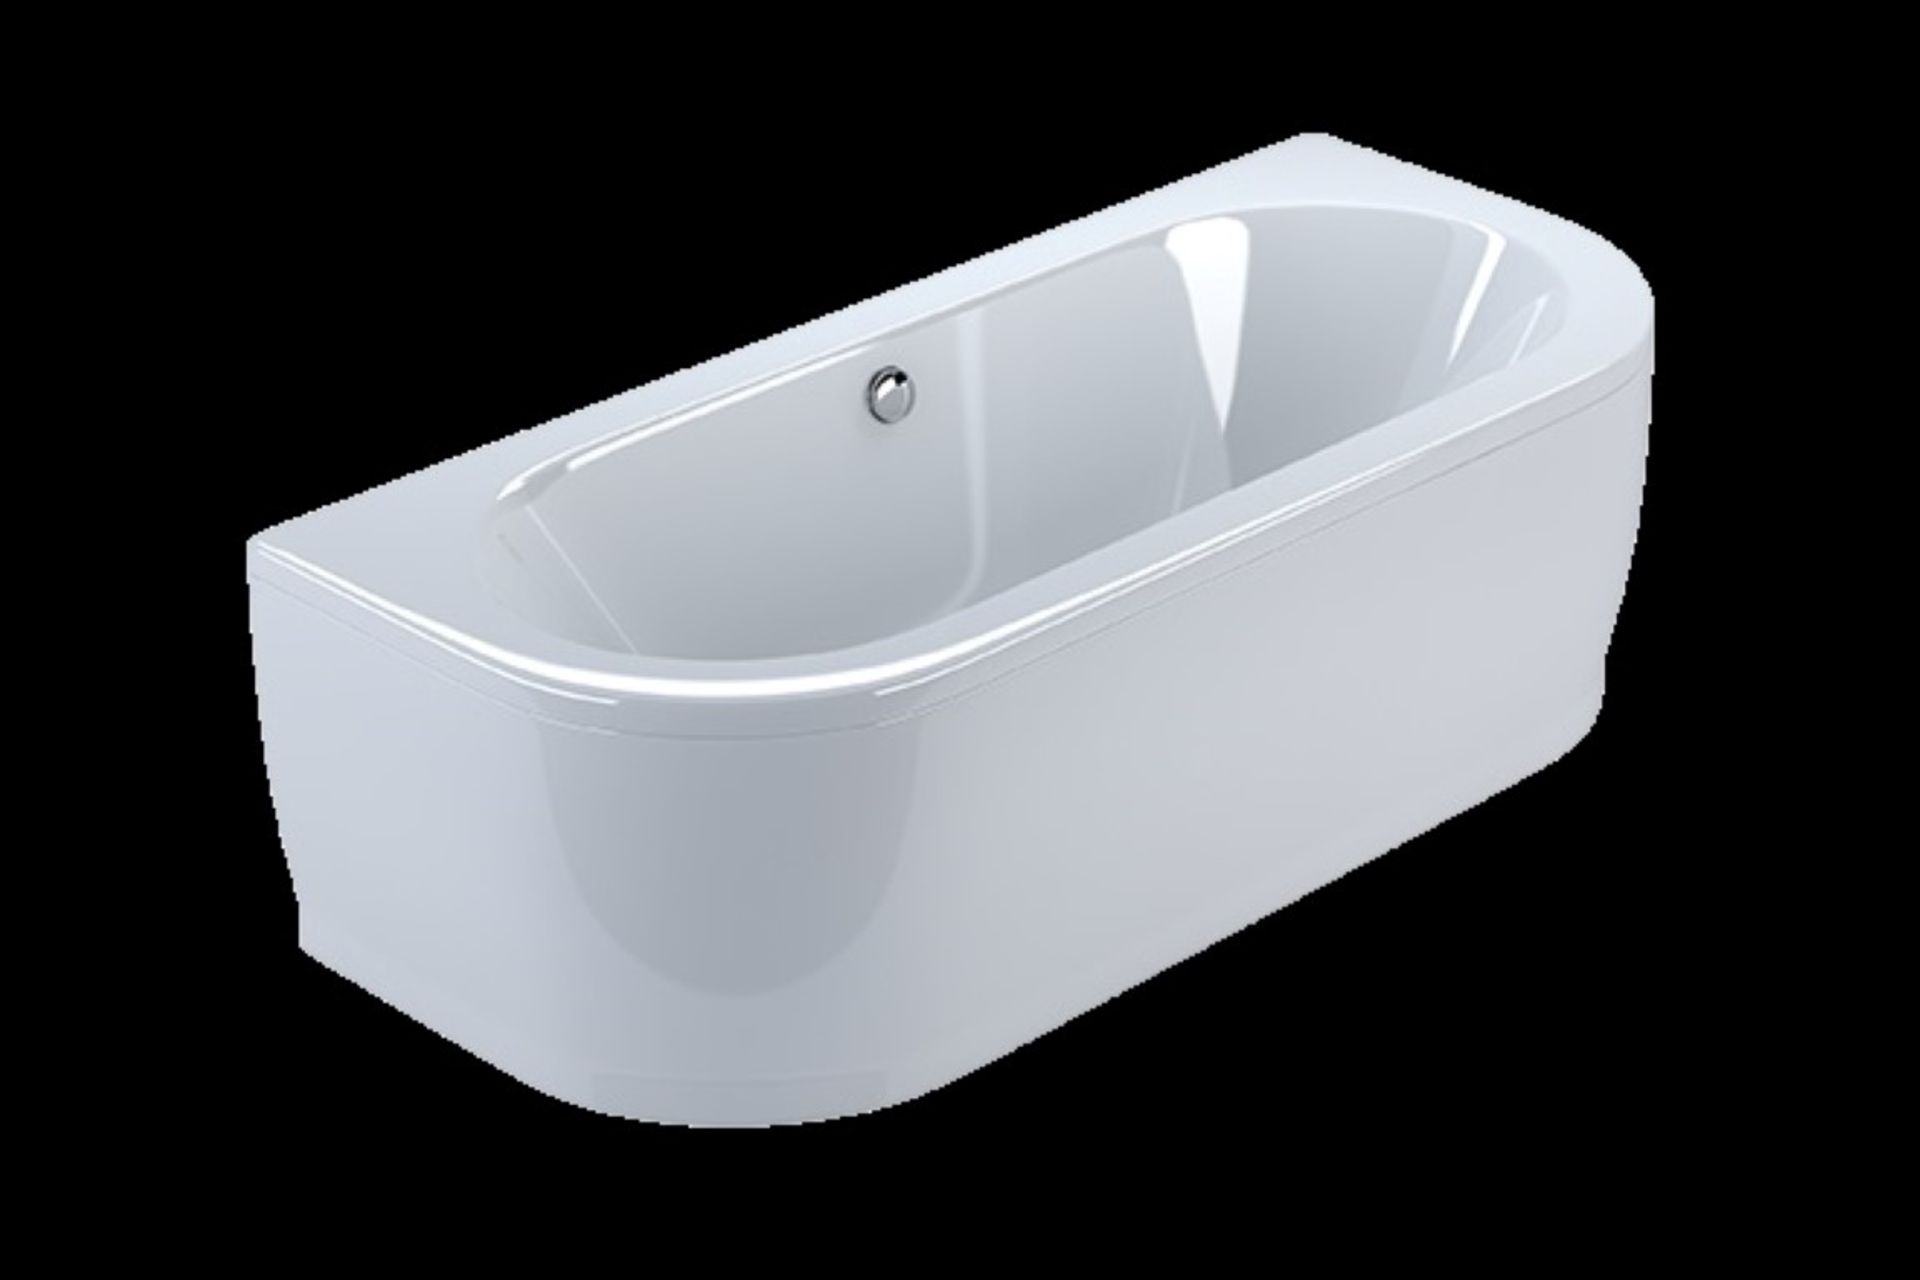 1 x "Palladio" BACK TO WALL BATH - Stylish Curvaceous Design - White Acrylic - 1700 X 750MM - - Image 2 of 5